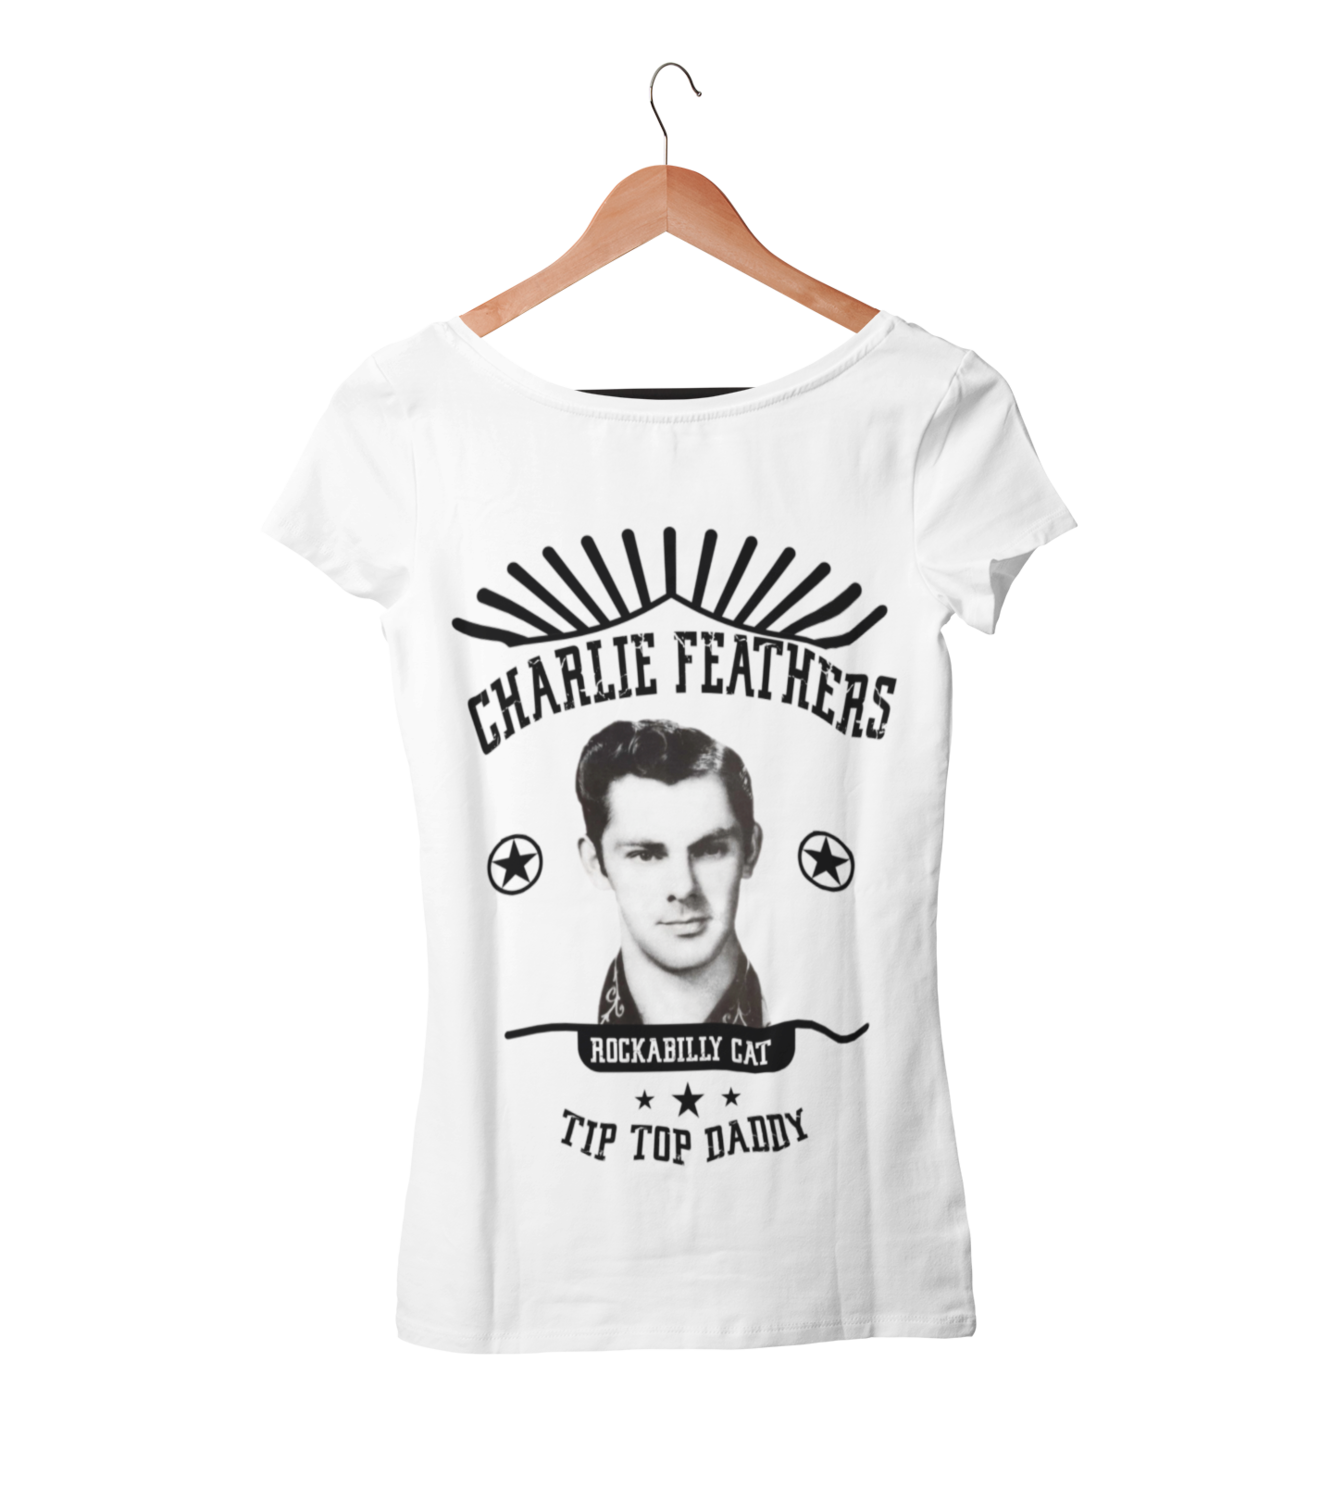 CHARLIE FEATHERS T-SHIRT WOMAN